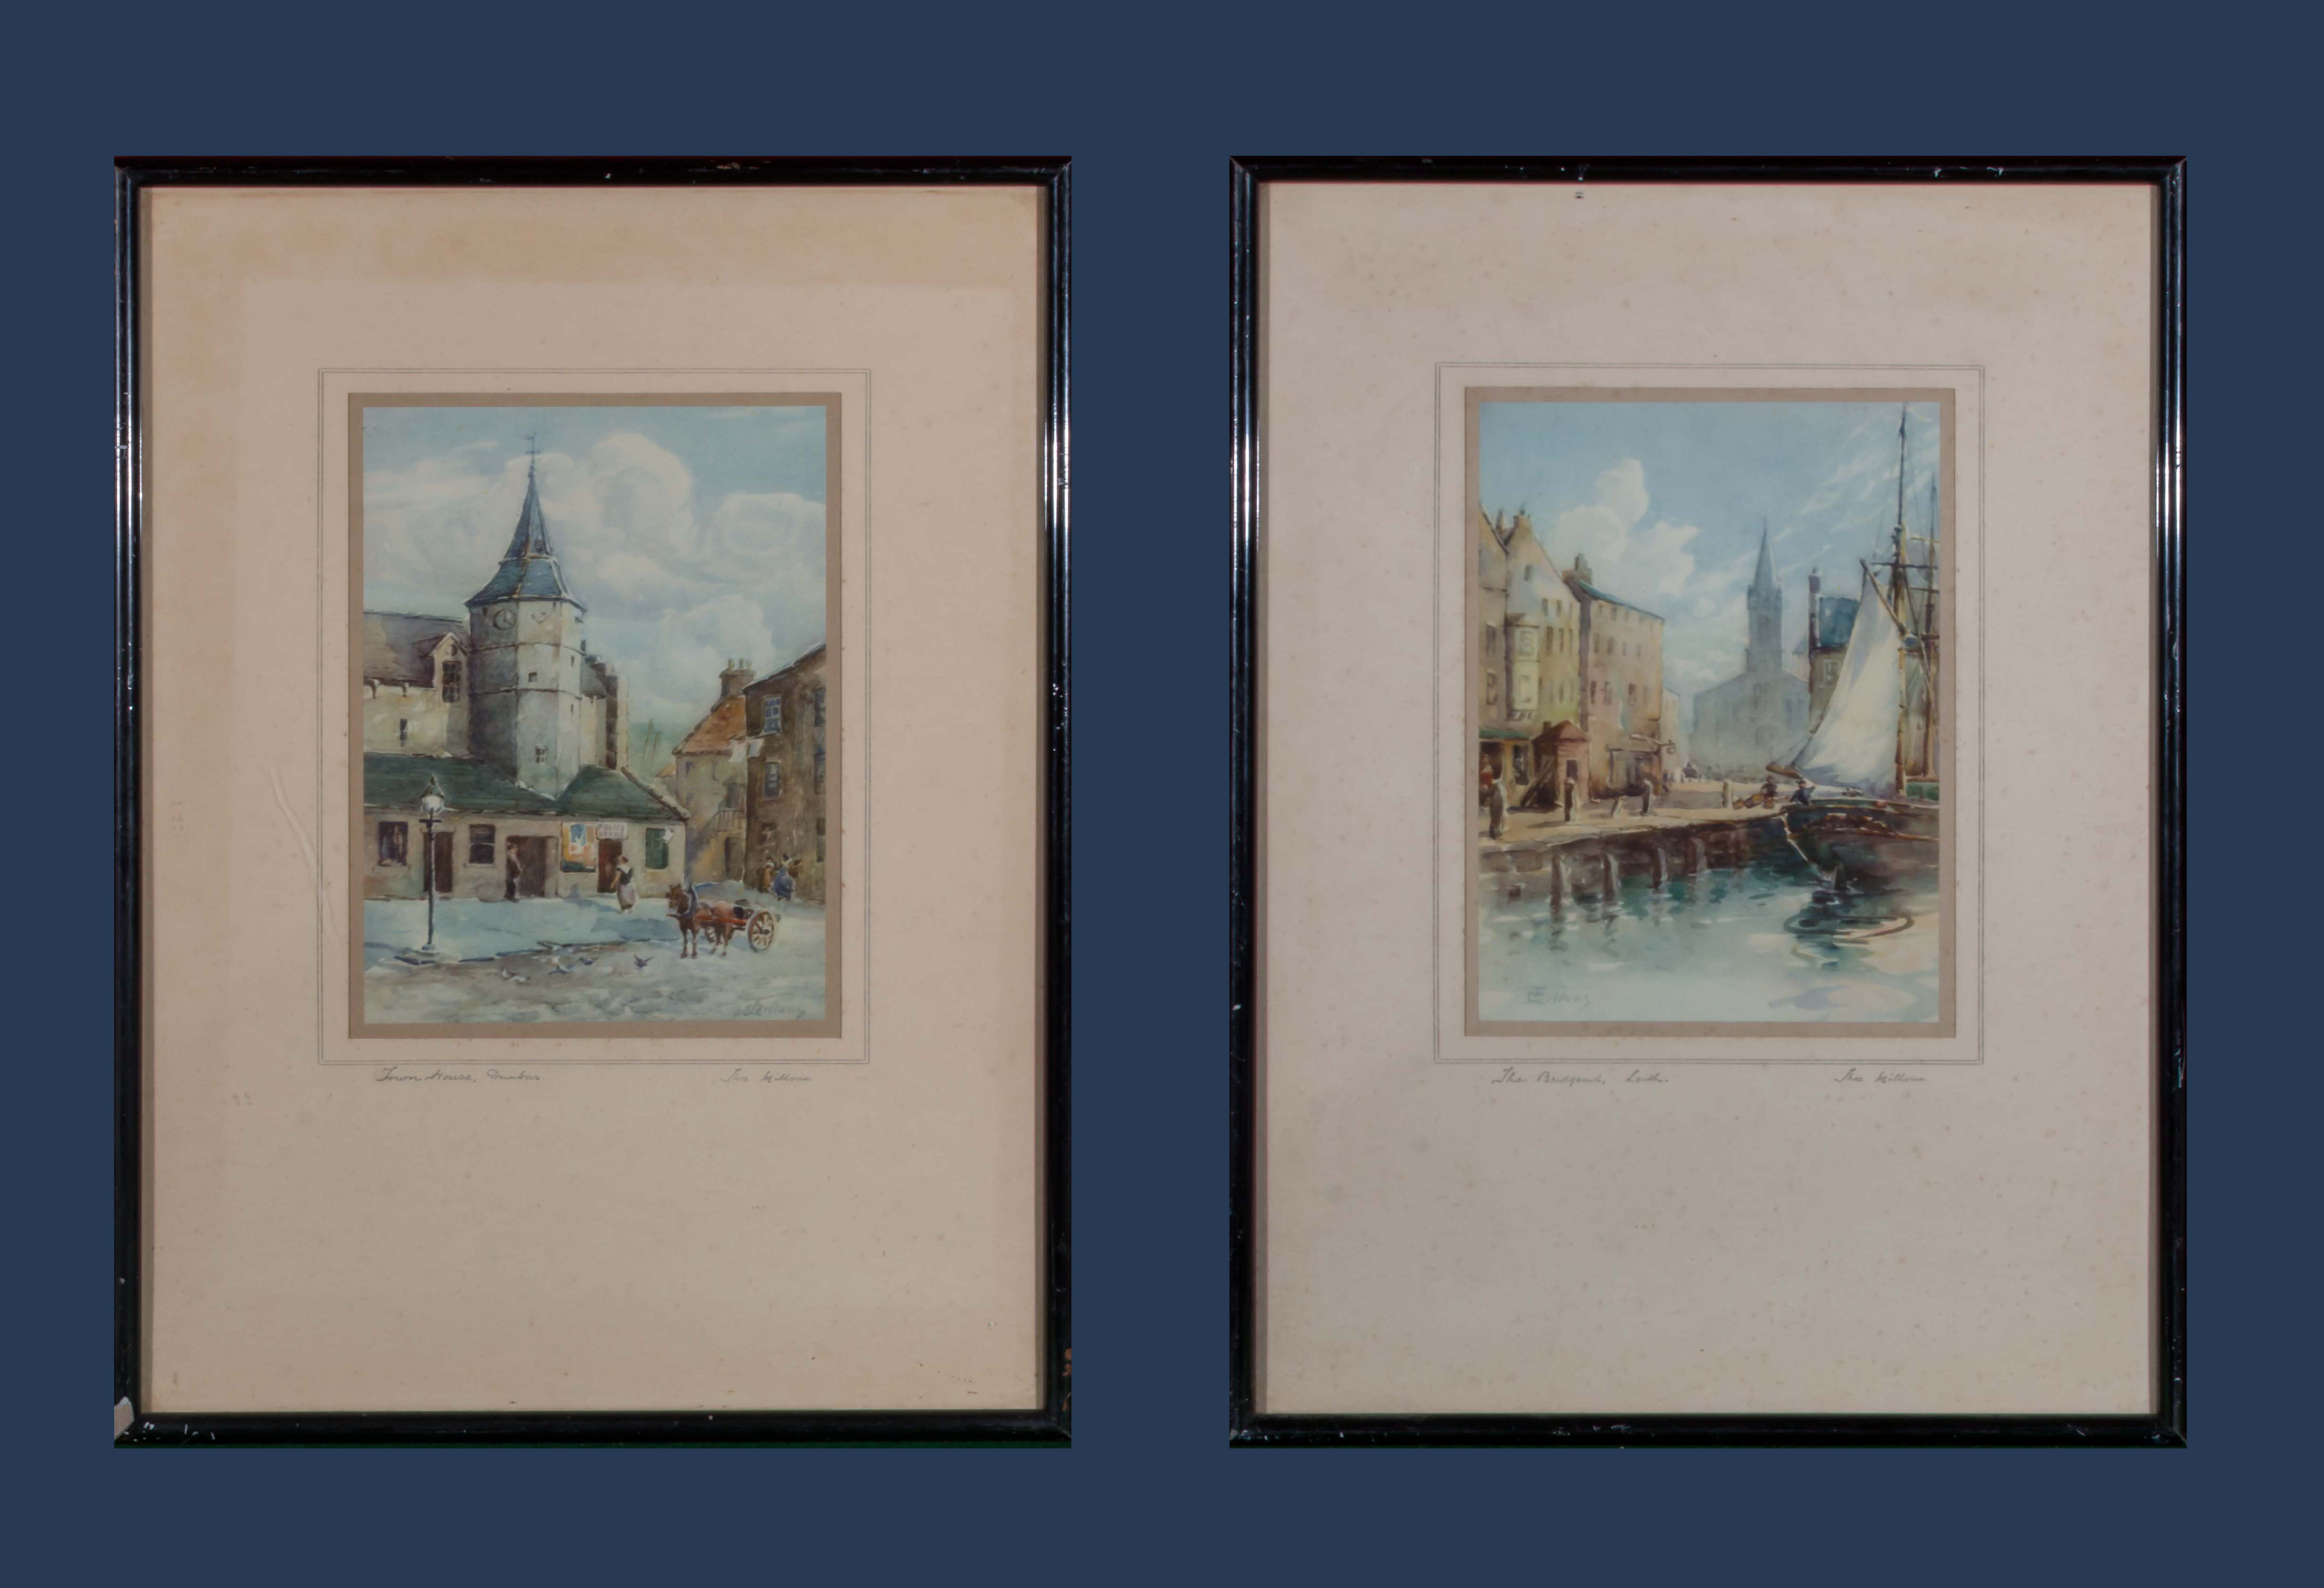 A pair of framed watercolours 'Town House Dunbar' and 'The Bridgend Leith' signed Thomas Millons